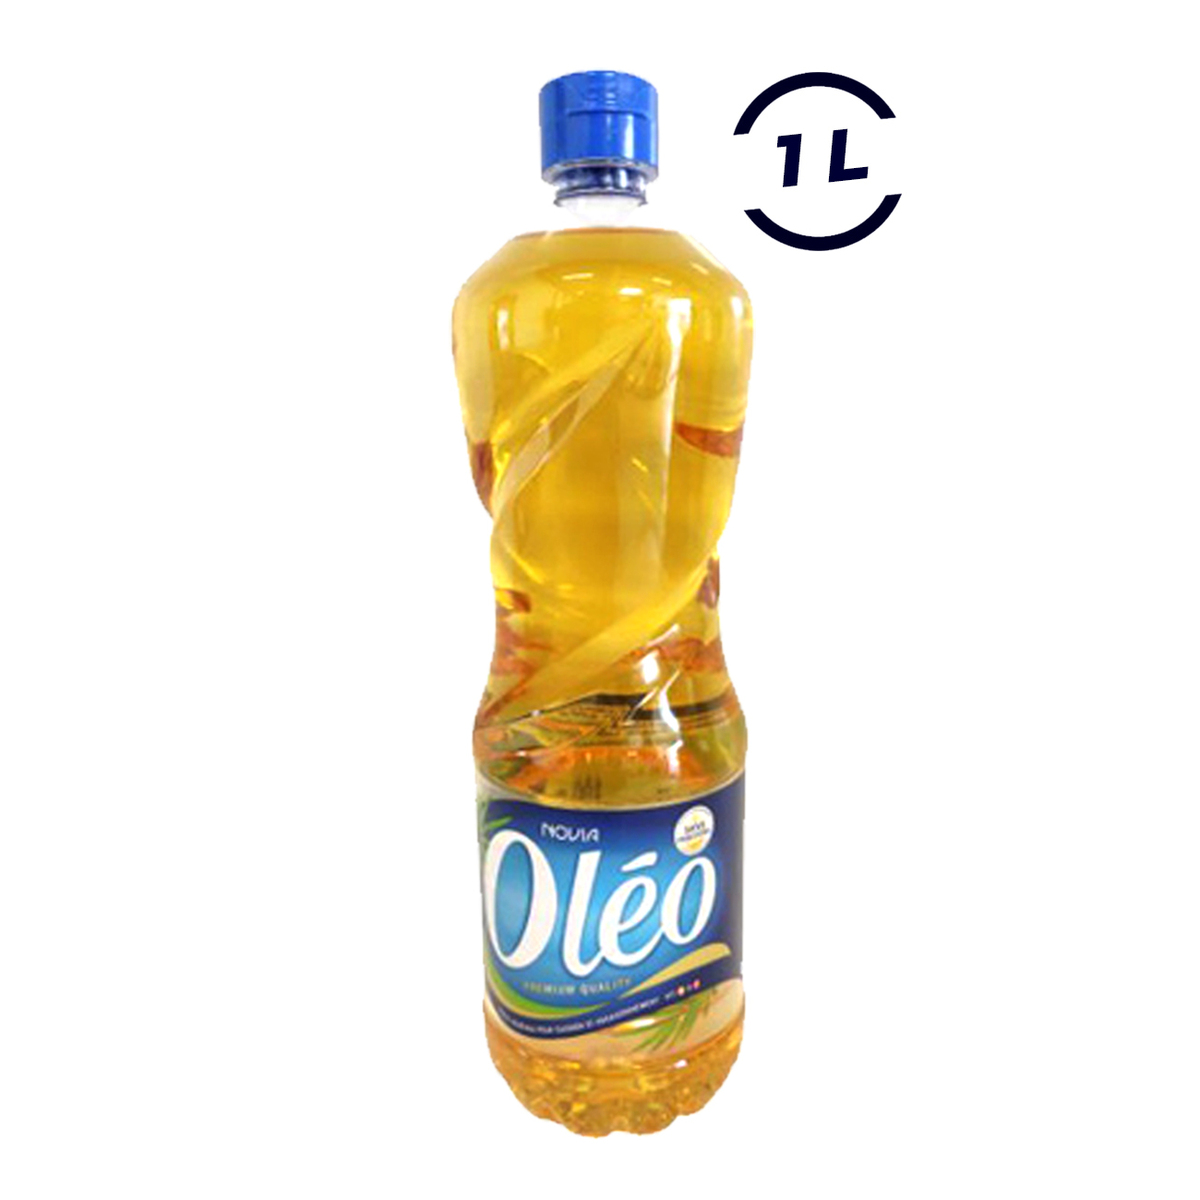 Oléo refined oil made in Cameroon